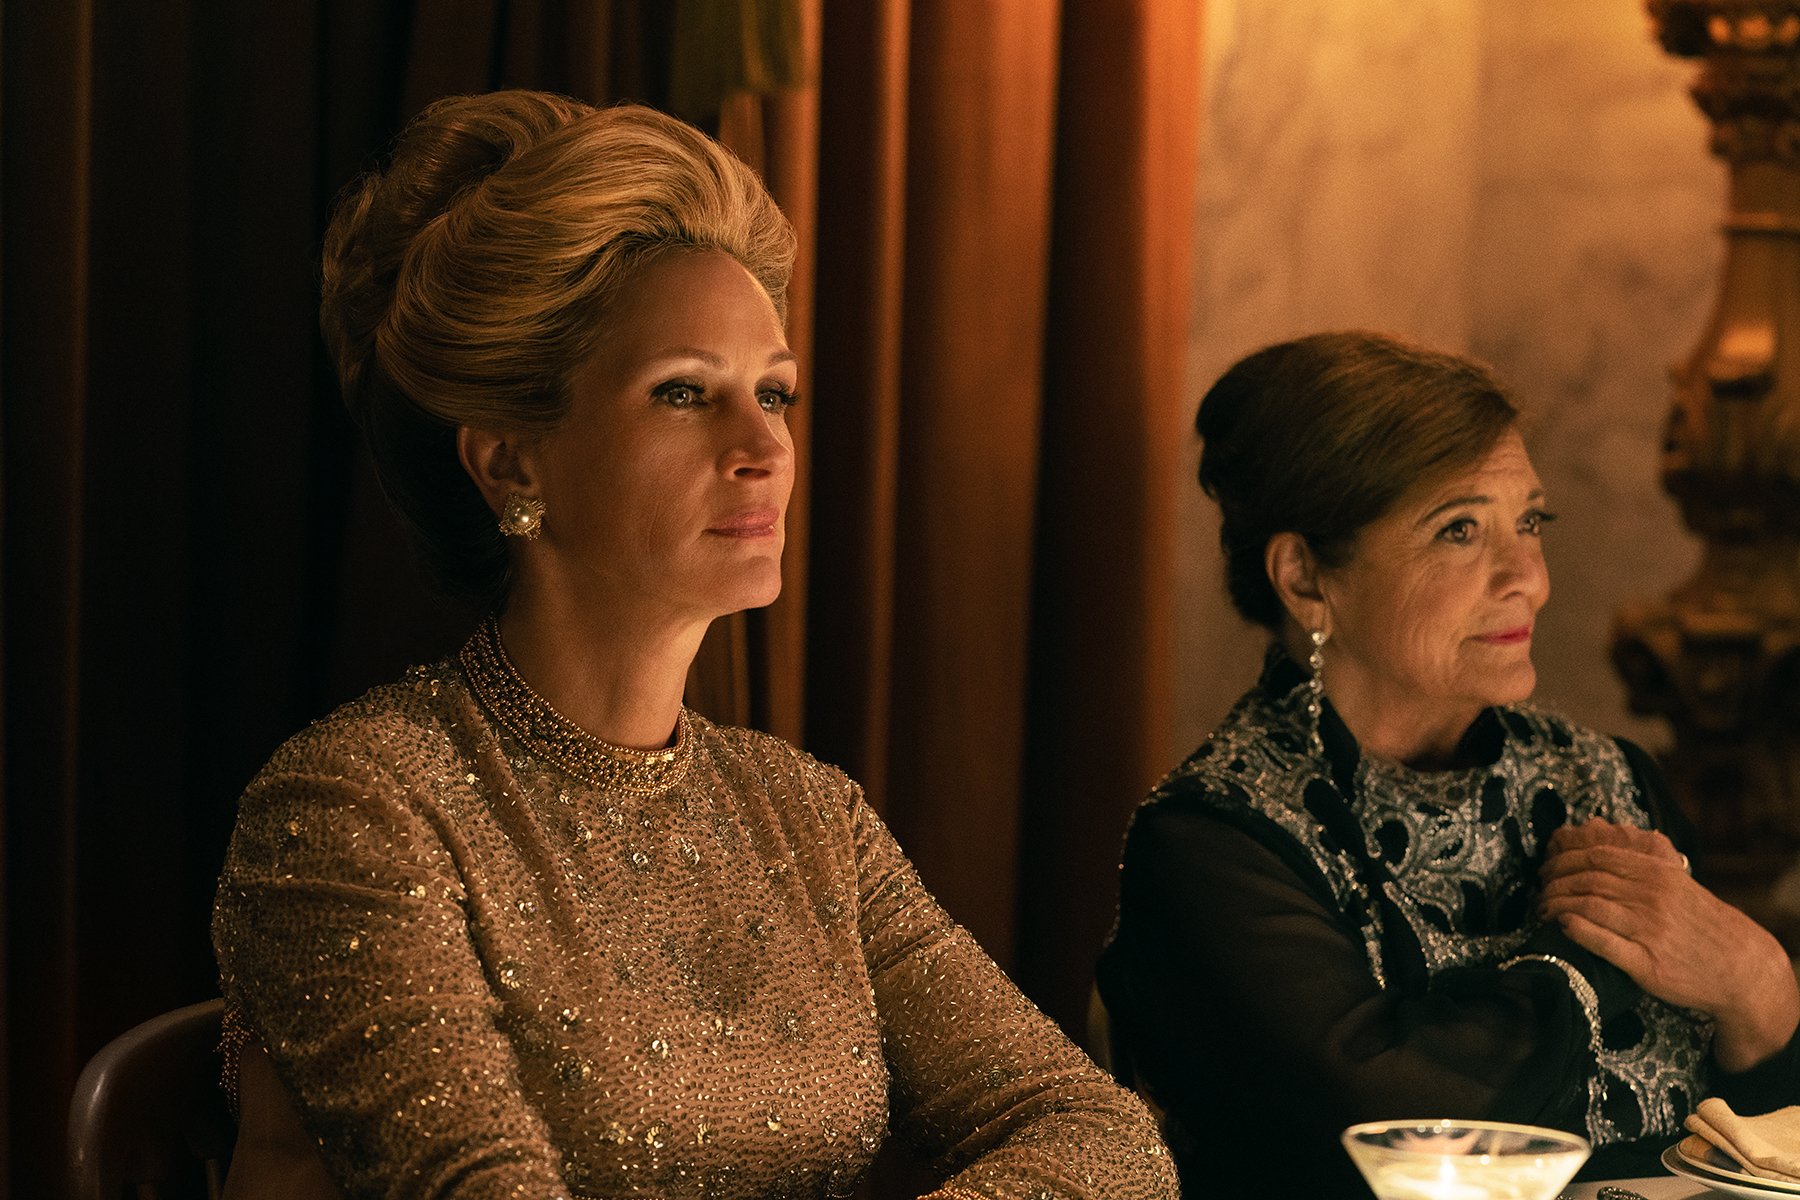 'Gaslit' star Julia Roberts as Martha Mitchell is seen here sitting in a formal gown at a dinner table in a production still from the series.